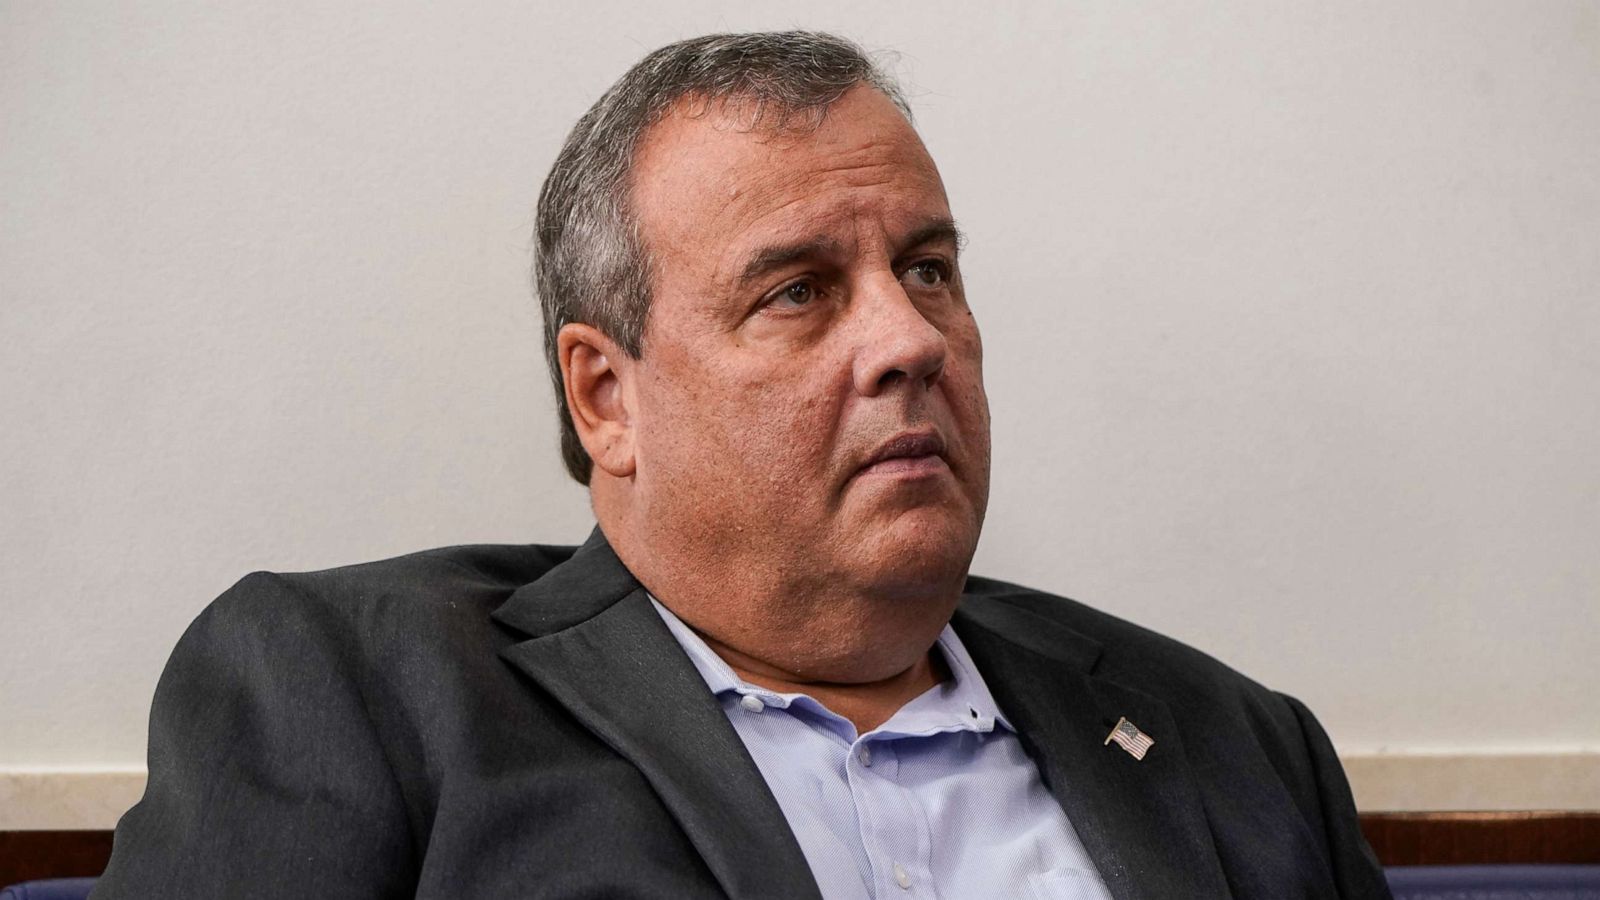 coronavirus-live-updates-chris-christie-speaks-out-after-contracting-covid19